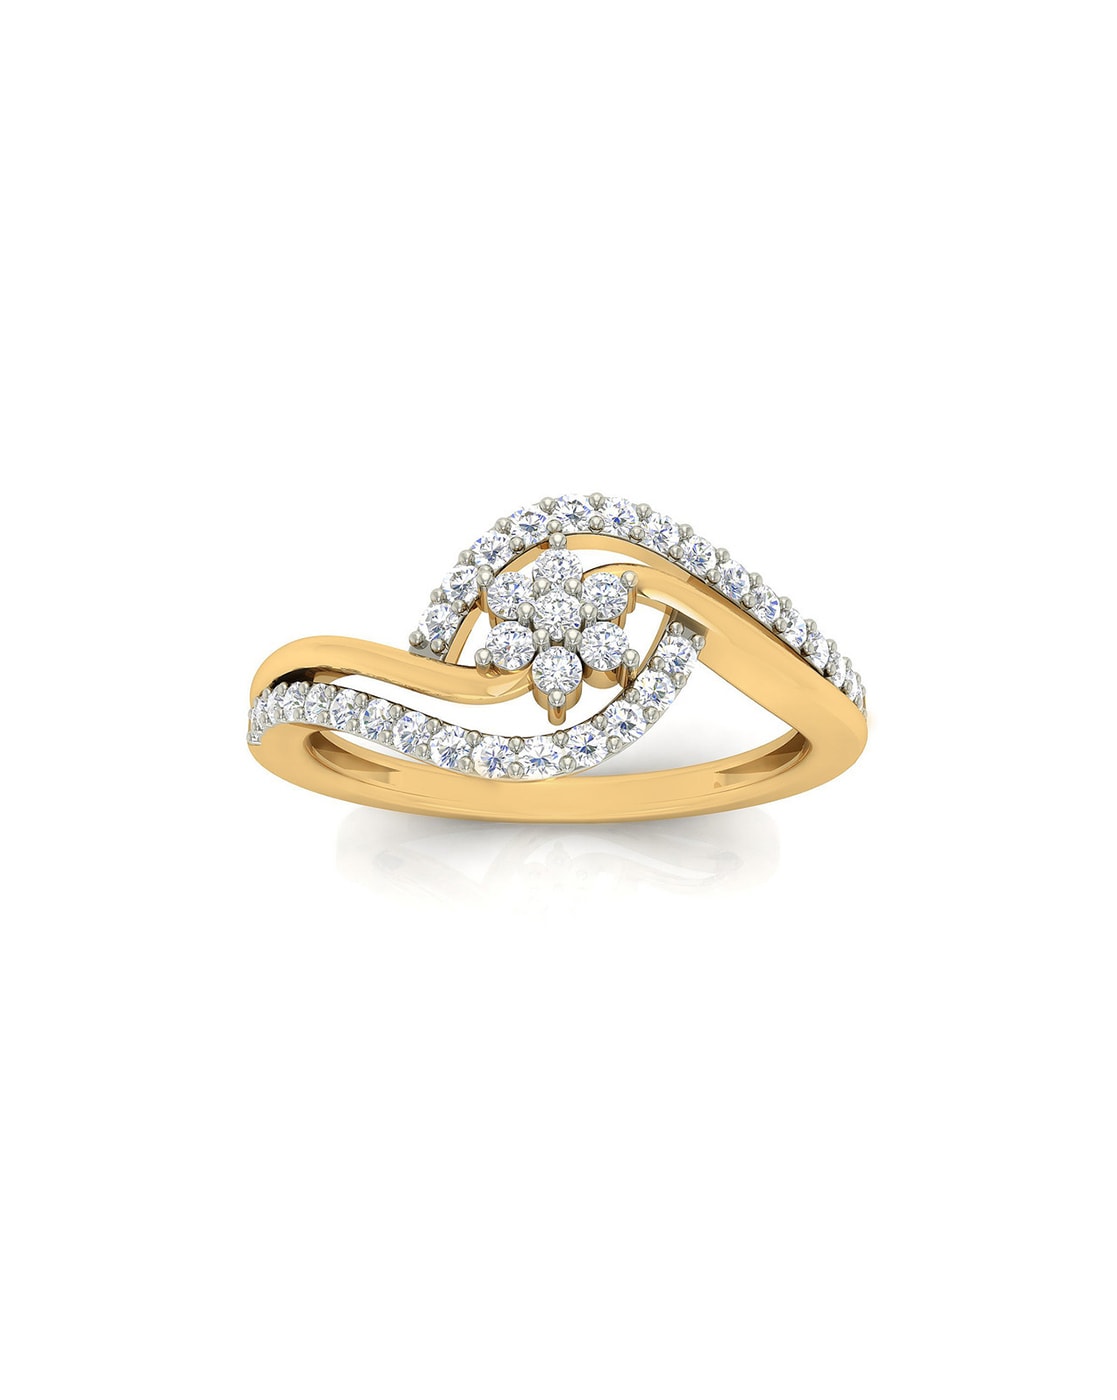 Buy Mia by Tanishq 14k (585) Yellow Gold and Diamond Ring for Women at  Amazon.in